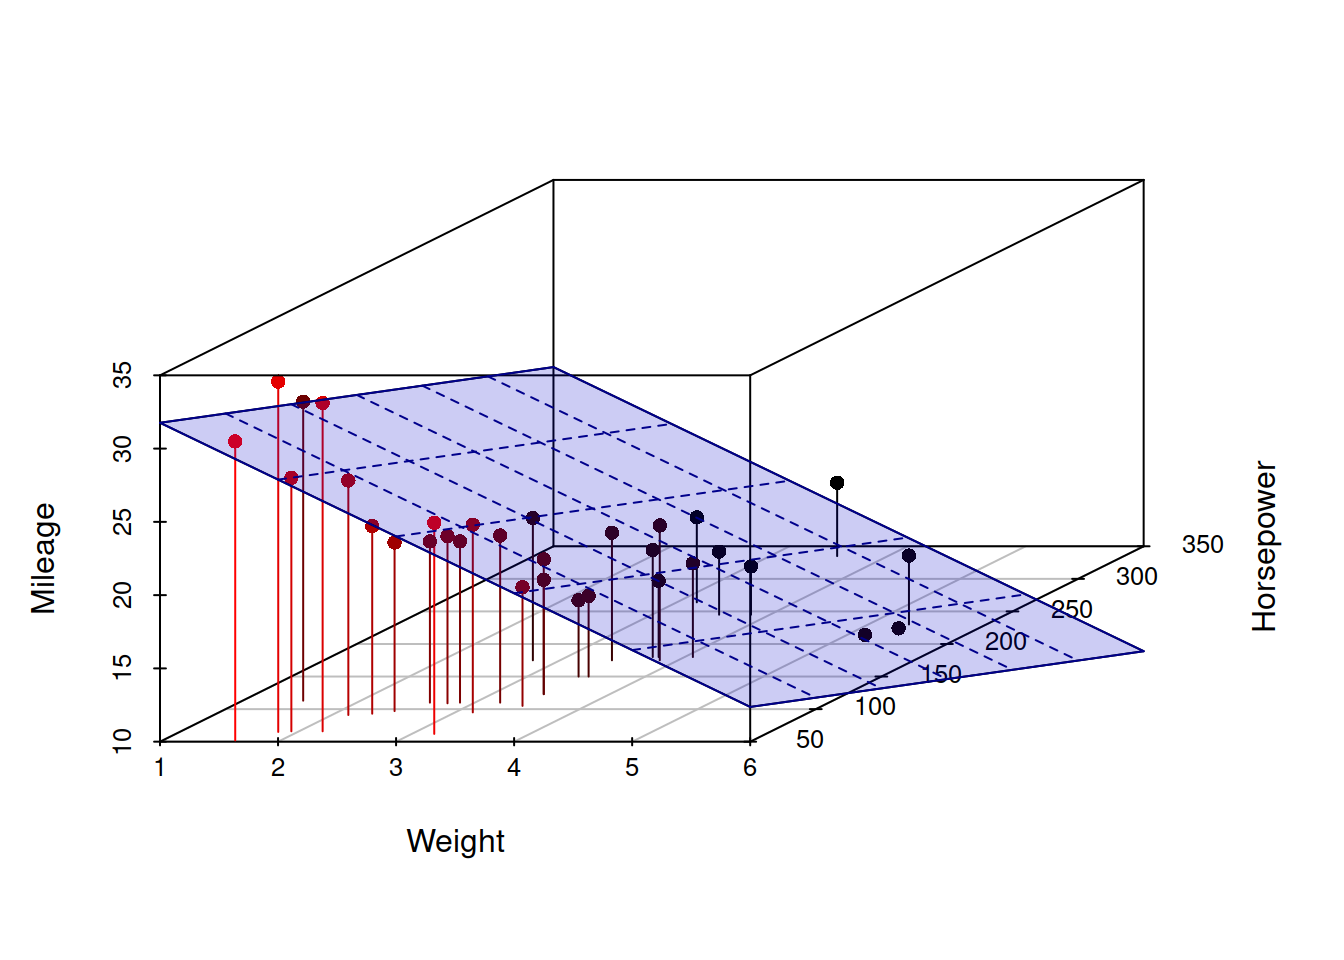 3D scatterplot of Mileage vs Weight of a car and its Engine Horsepower.